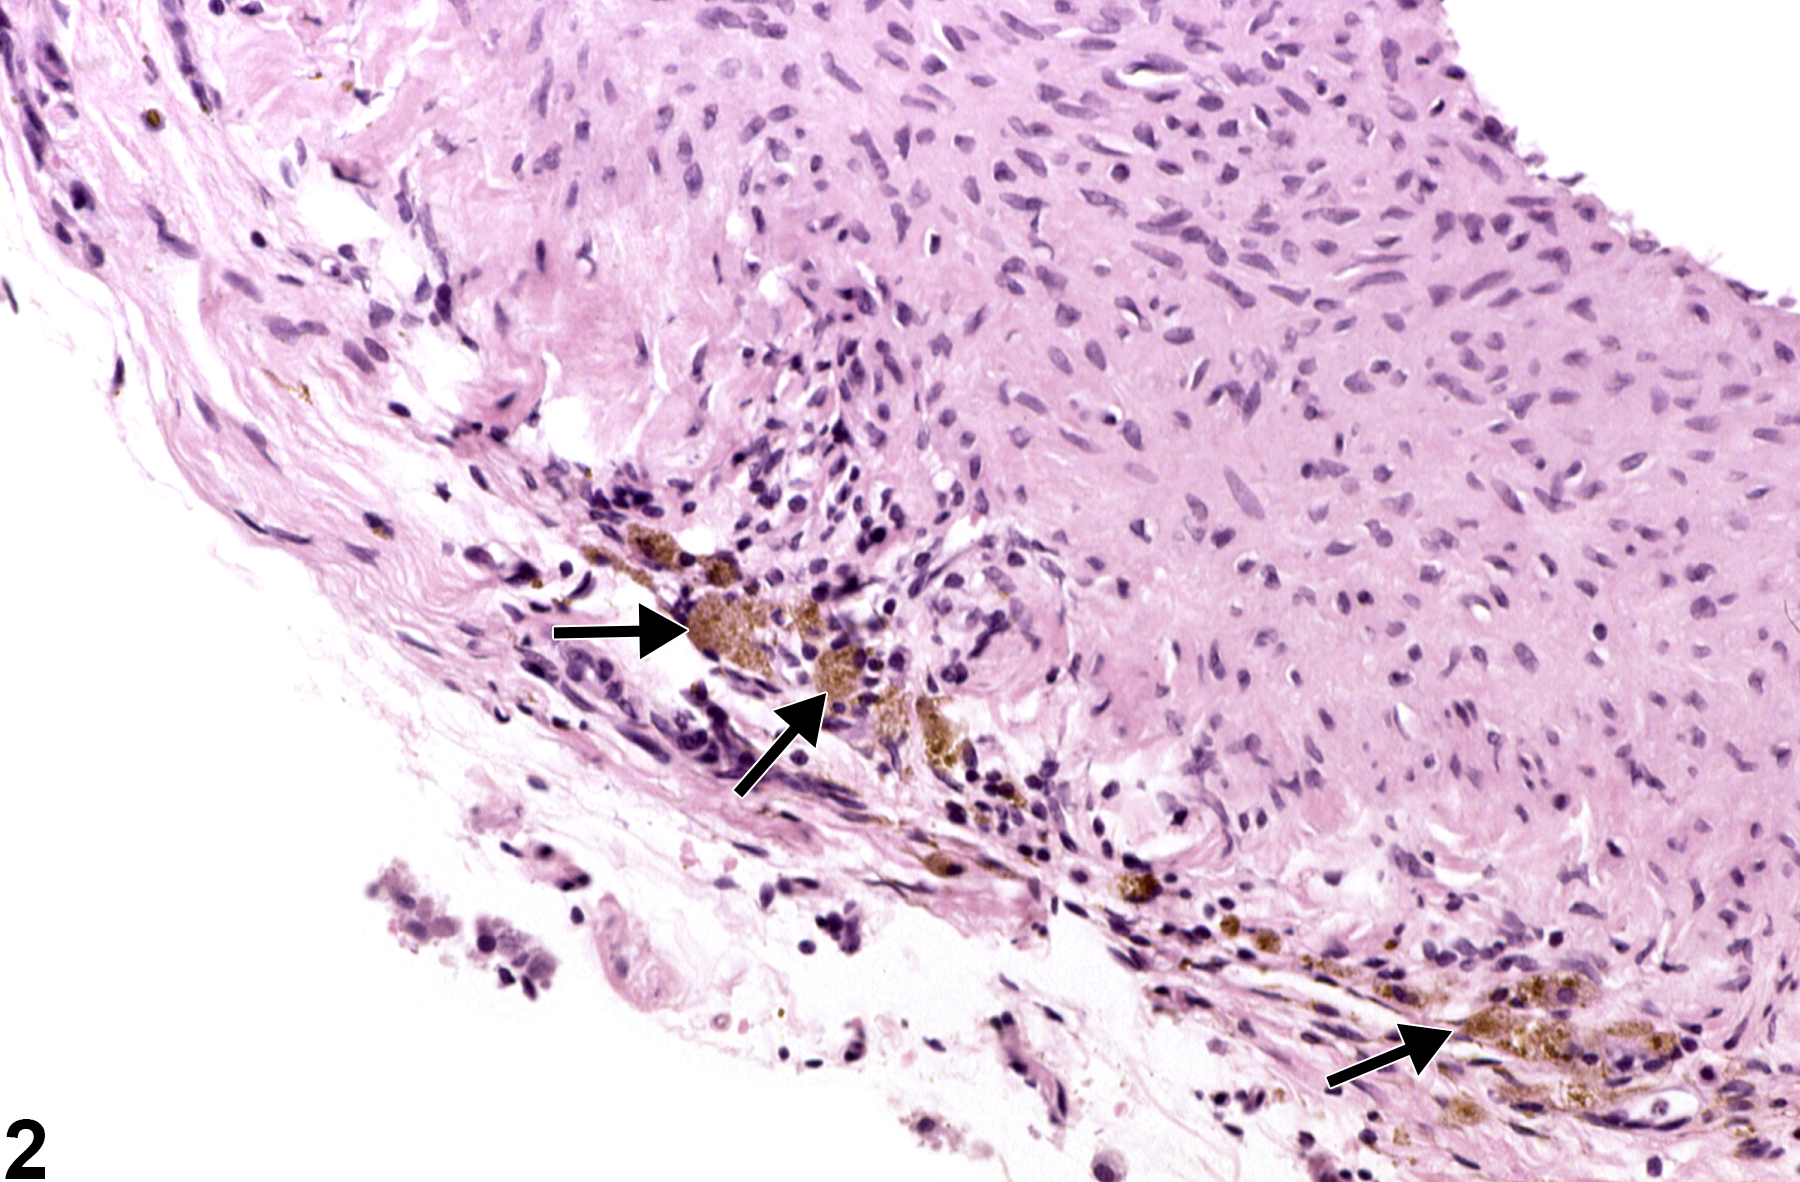 Image of pigment in the mesentery, artery from a male F344/N rat in a chronic study